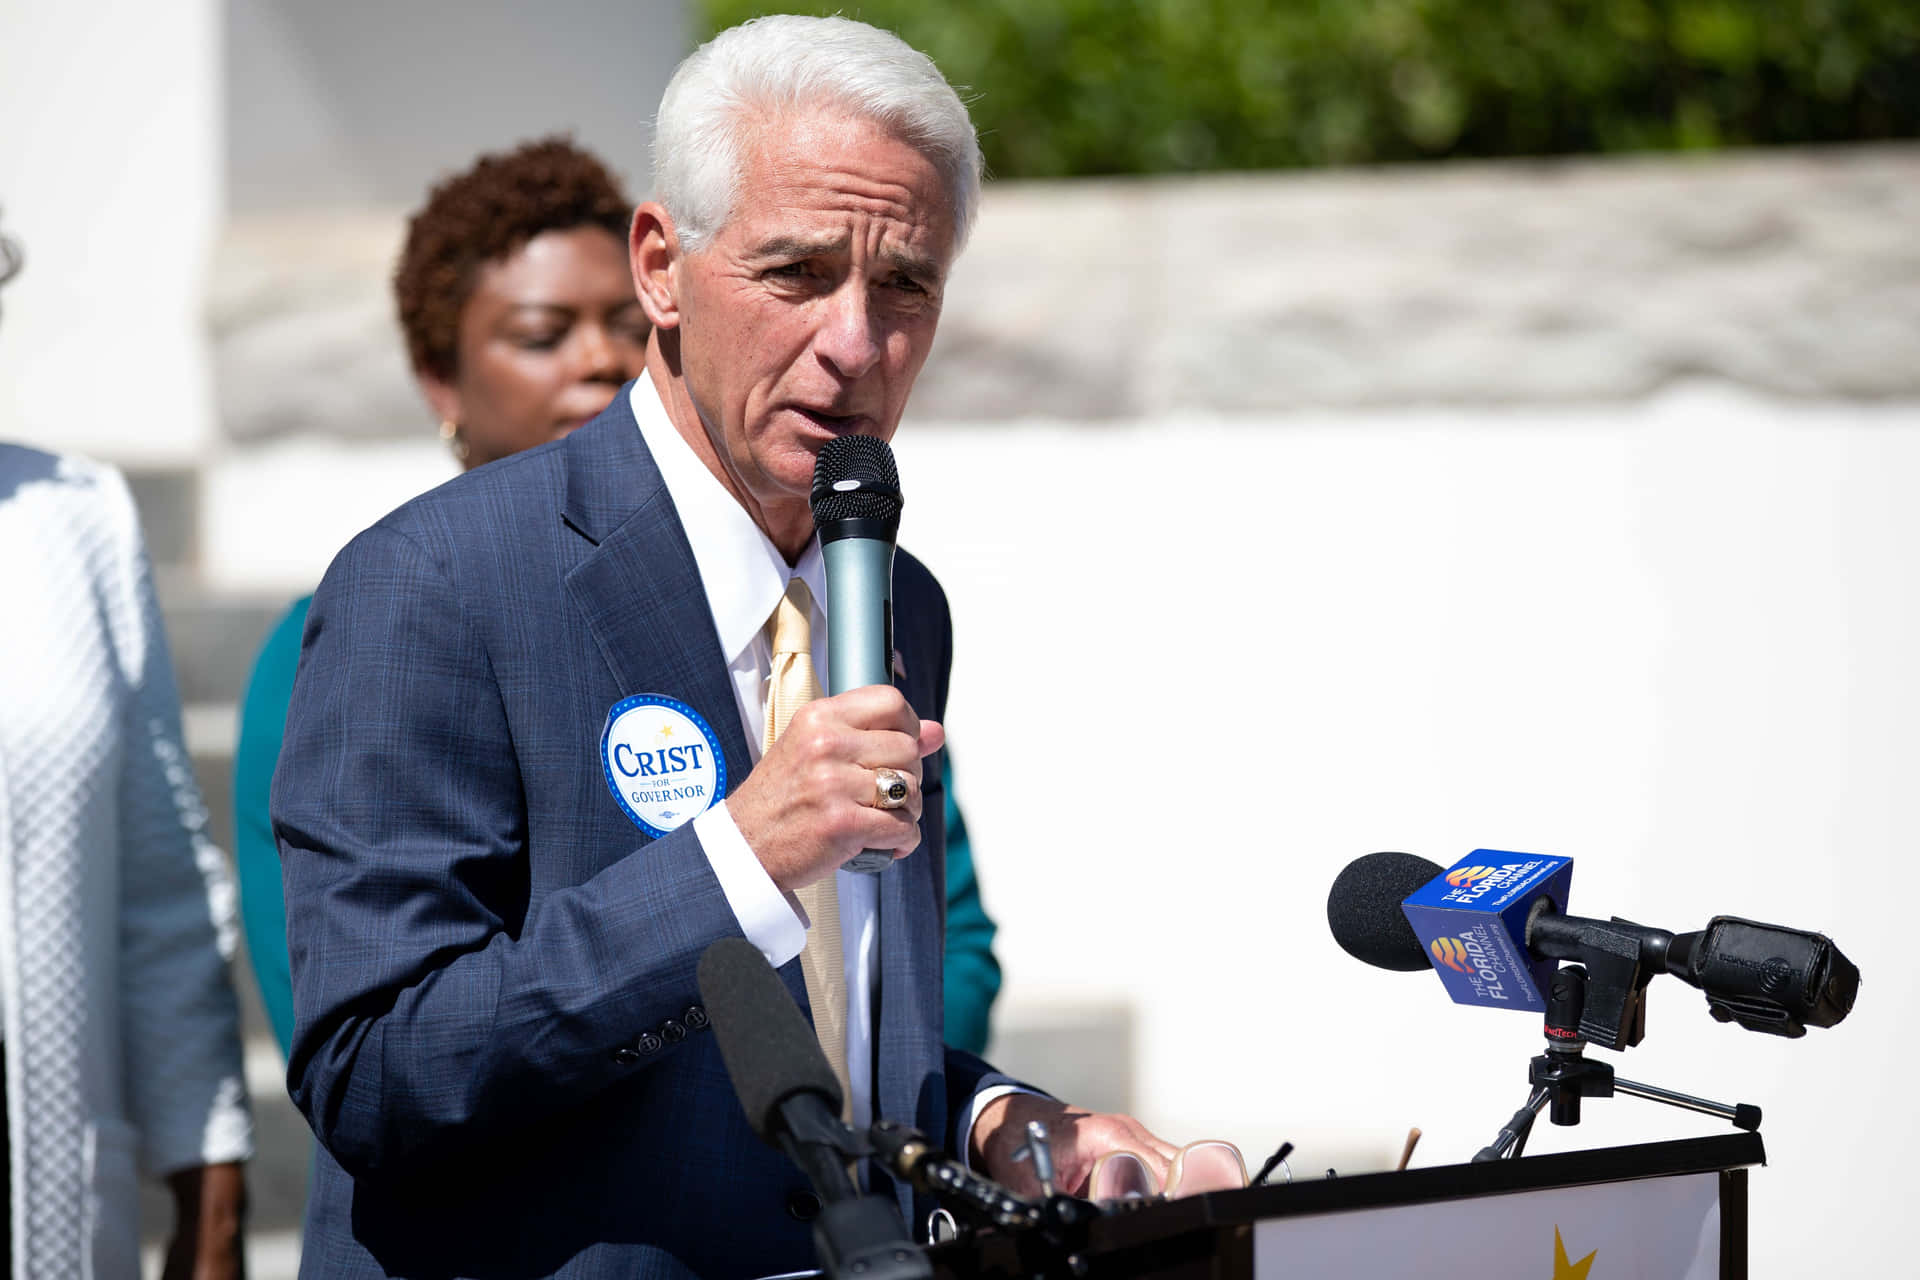 Florida's Leader at Work: Charlie Crist delivering a committed speech Wallpaper